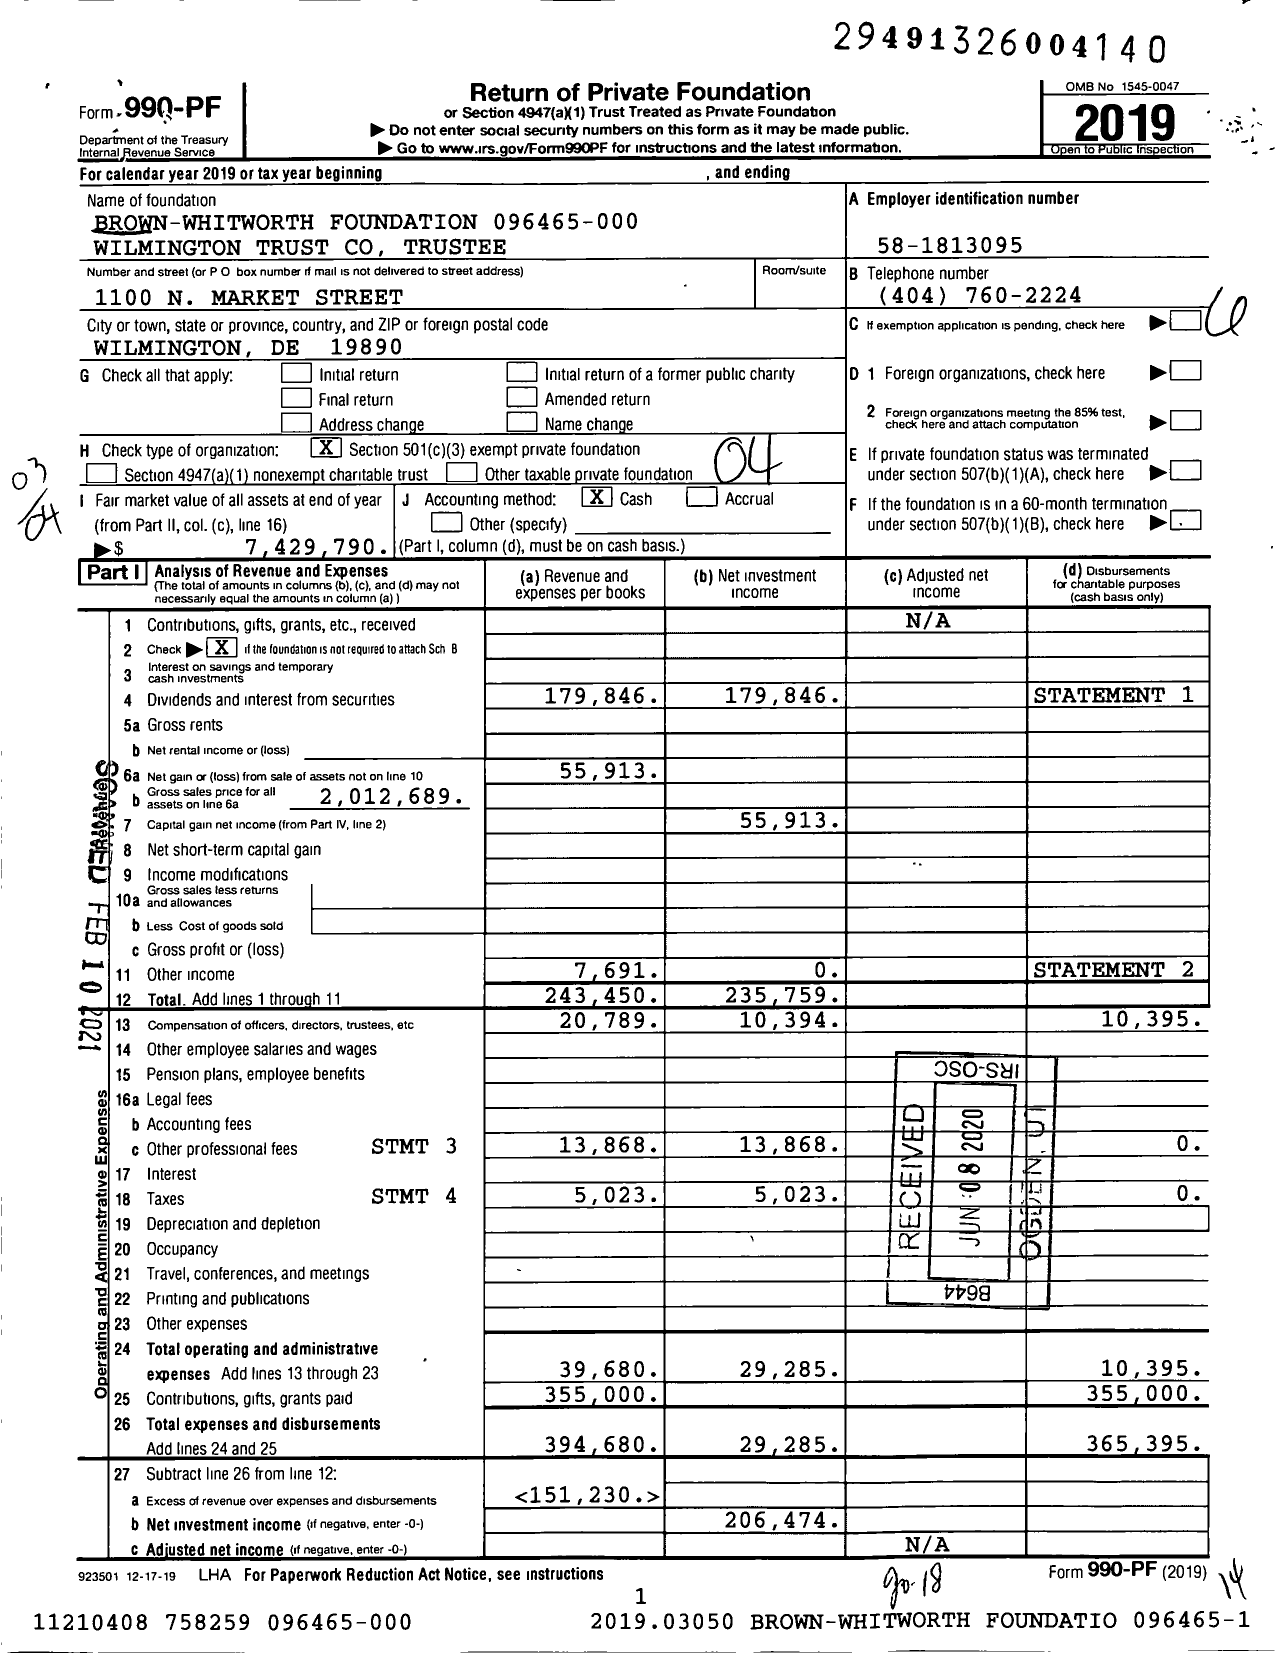 Image of first page of 2019 Form 990PF for Brown-Whitworth Foundation 096465-000